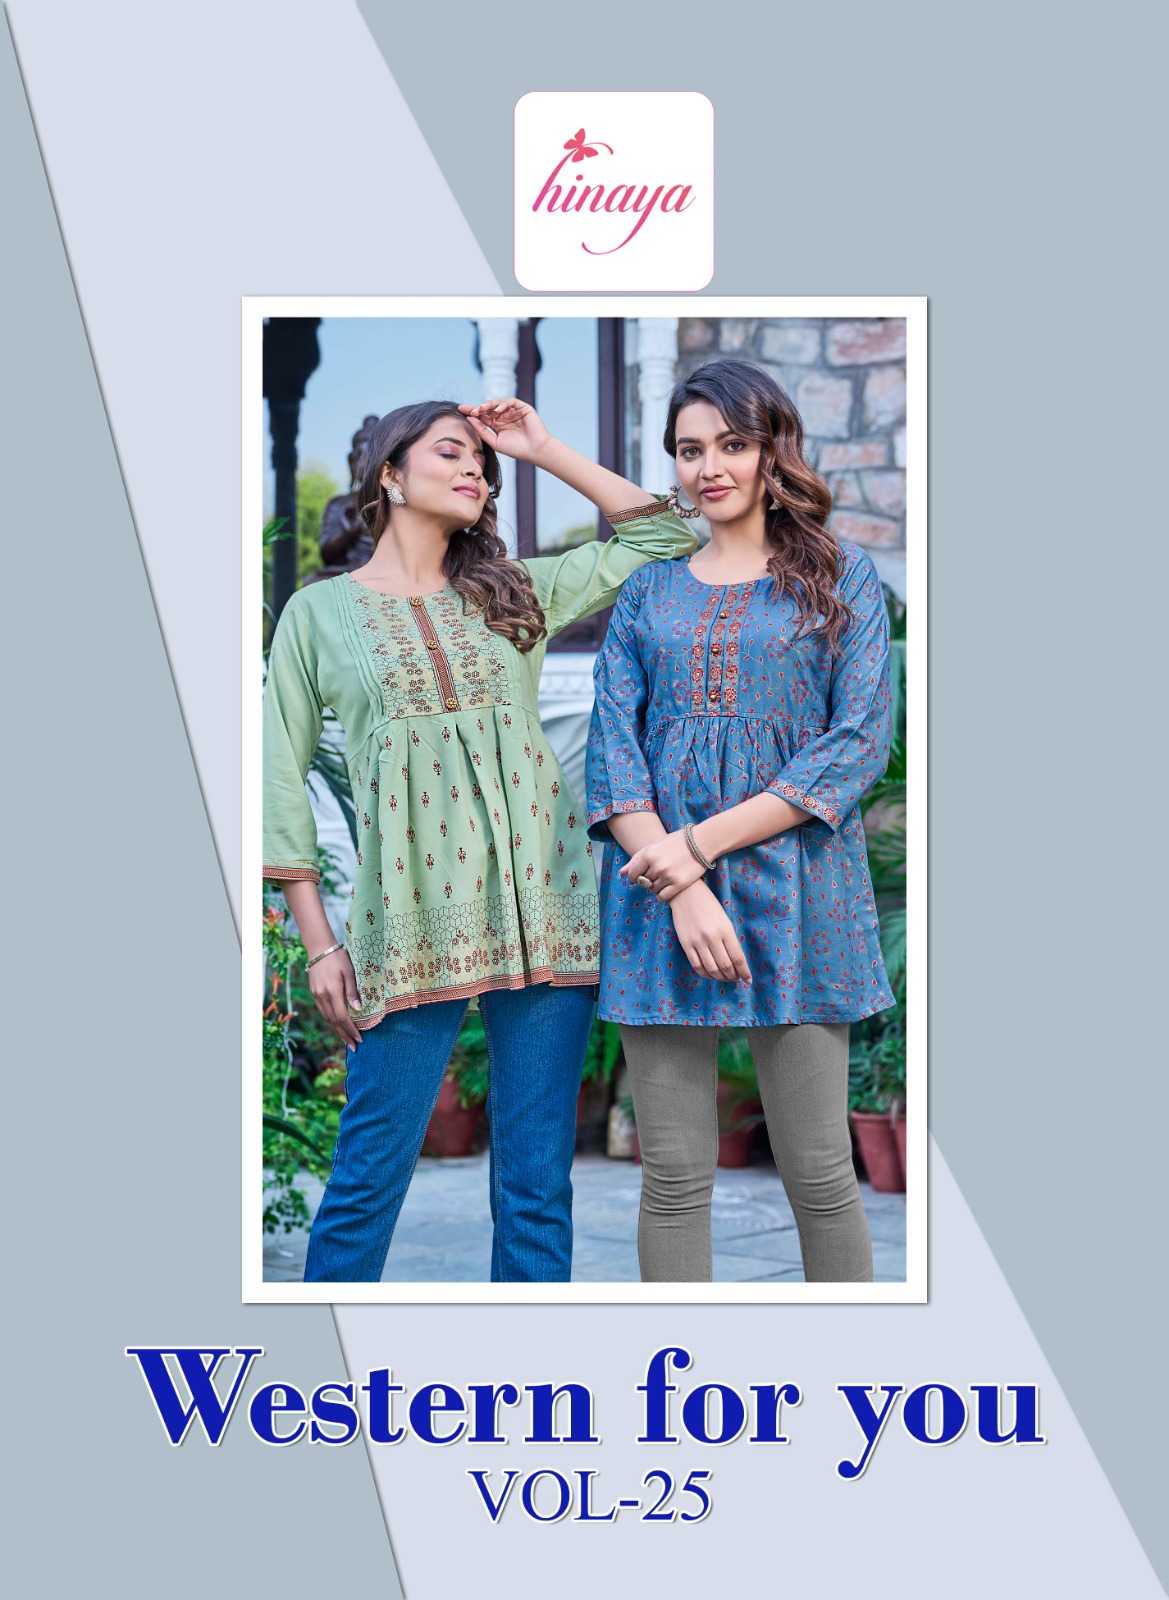 hinaya western 4 you vol 25 launch trending casual look rayon full stitch short top 